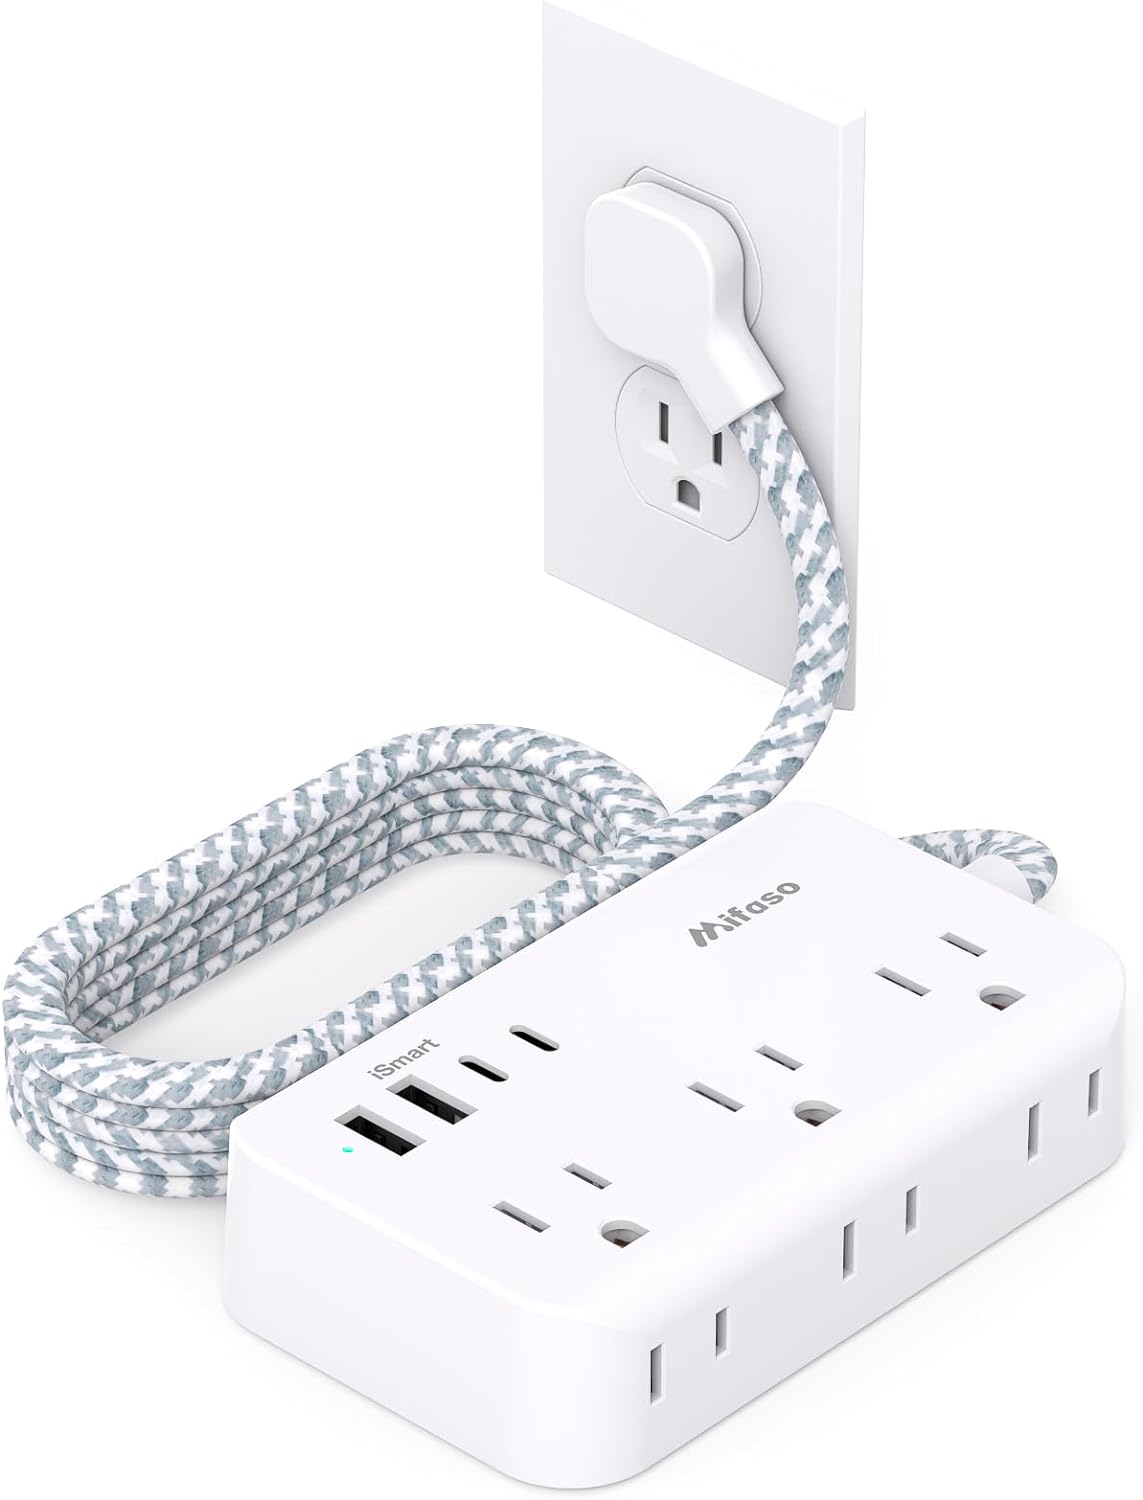 Power Strip Extension Cord - 6 Outlets and 4 USB (2 USB C), 5Ft Braided Cord with Ultra Thin Flat Plug, Wall Mount, Overload Protection, Compact for Travel, Cruise Ship, and Dorm Room Essentials